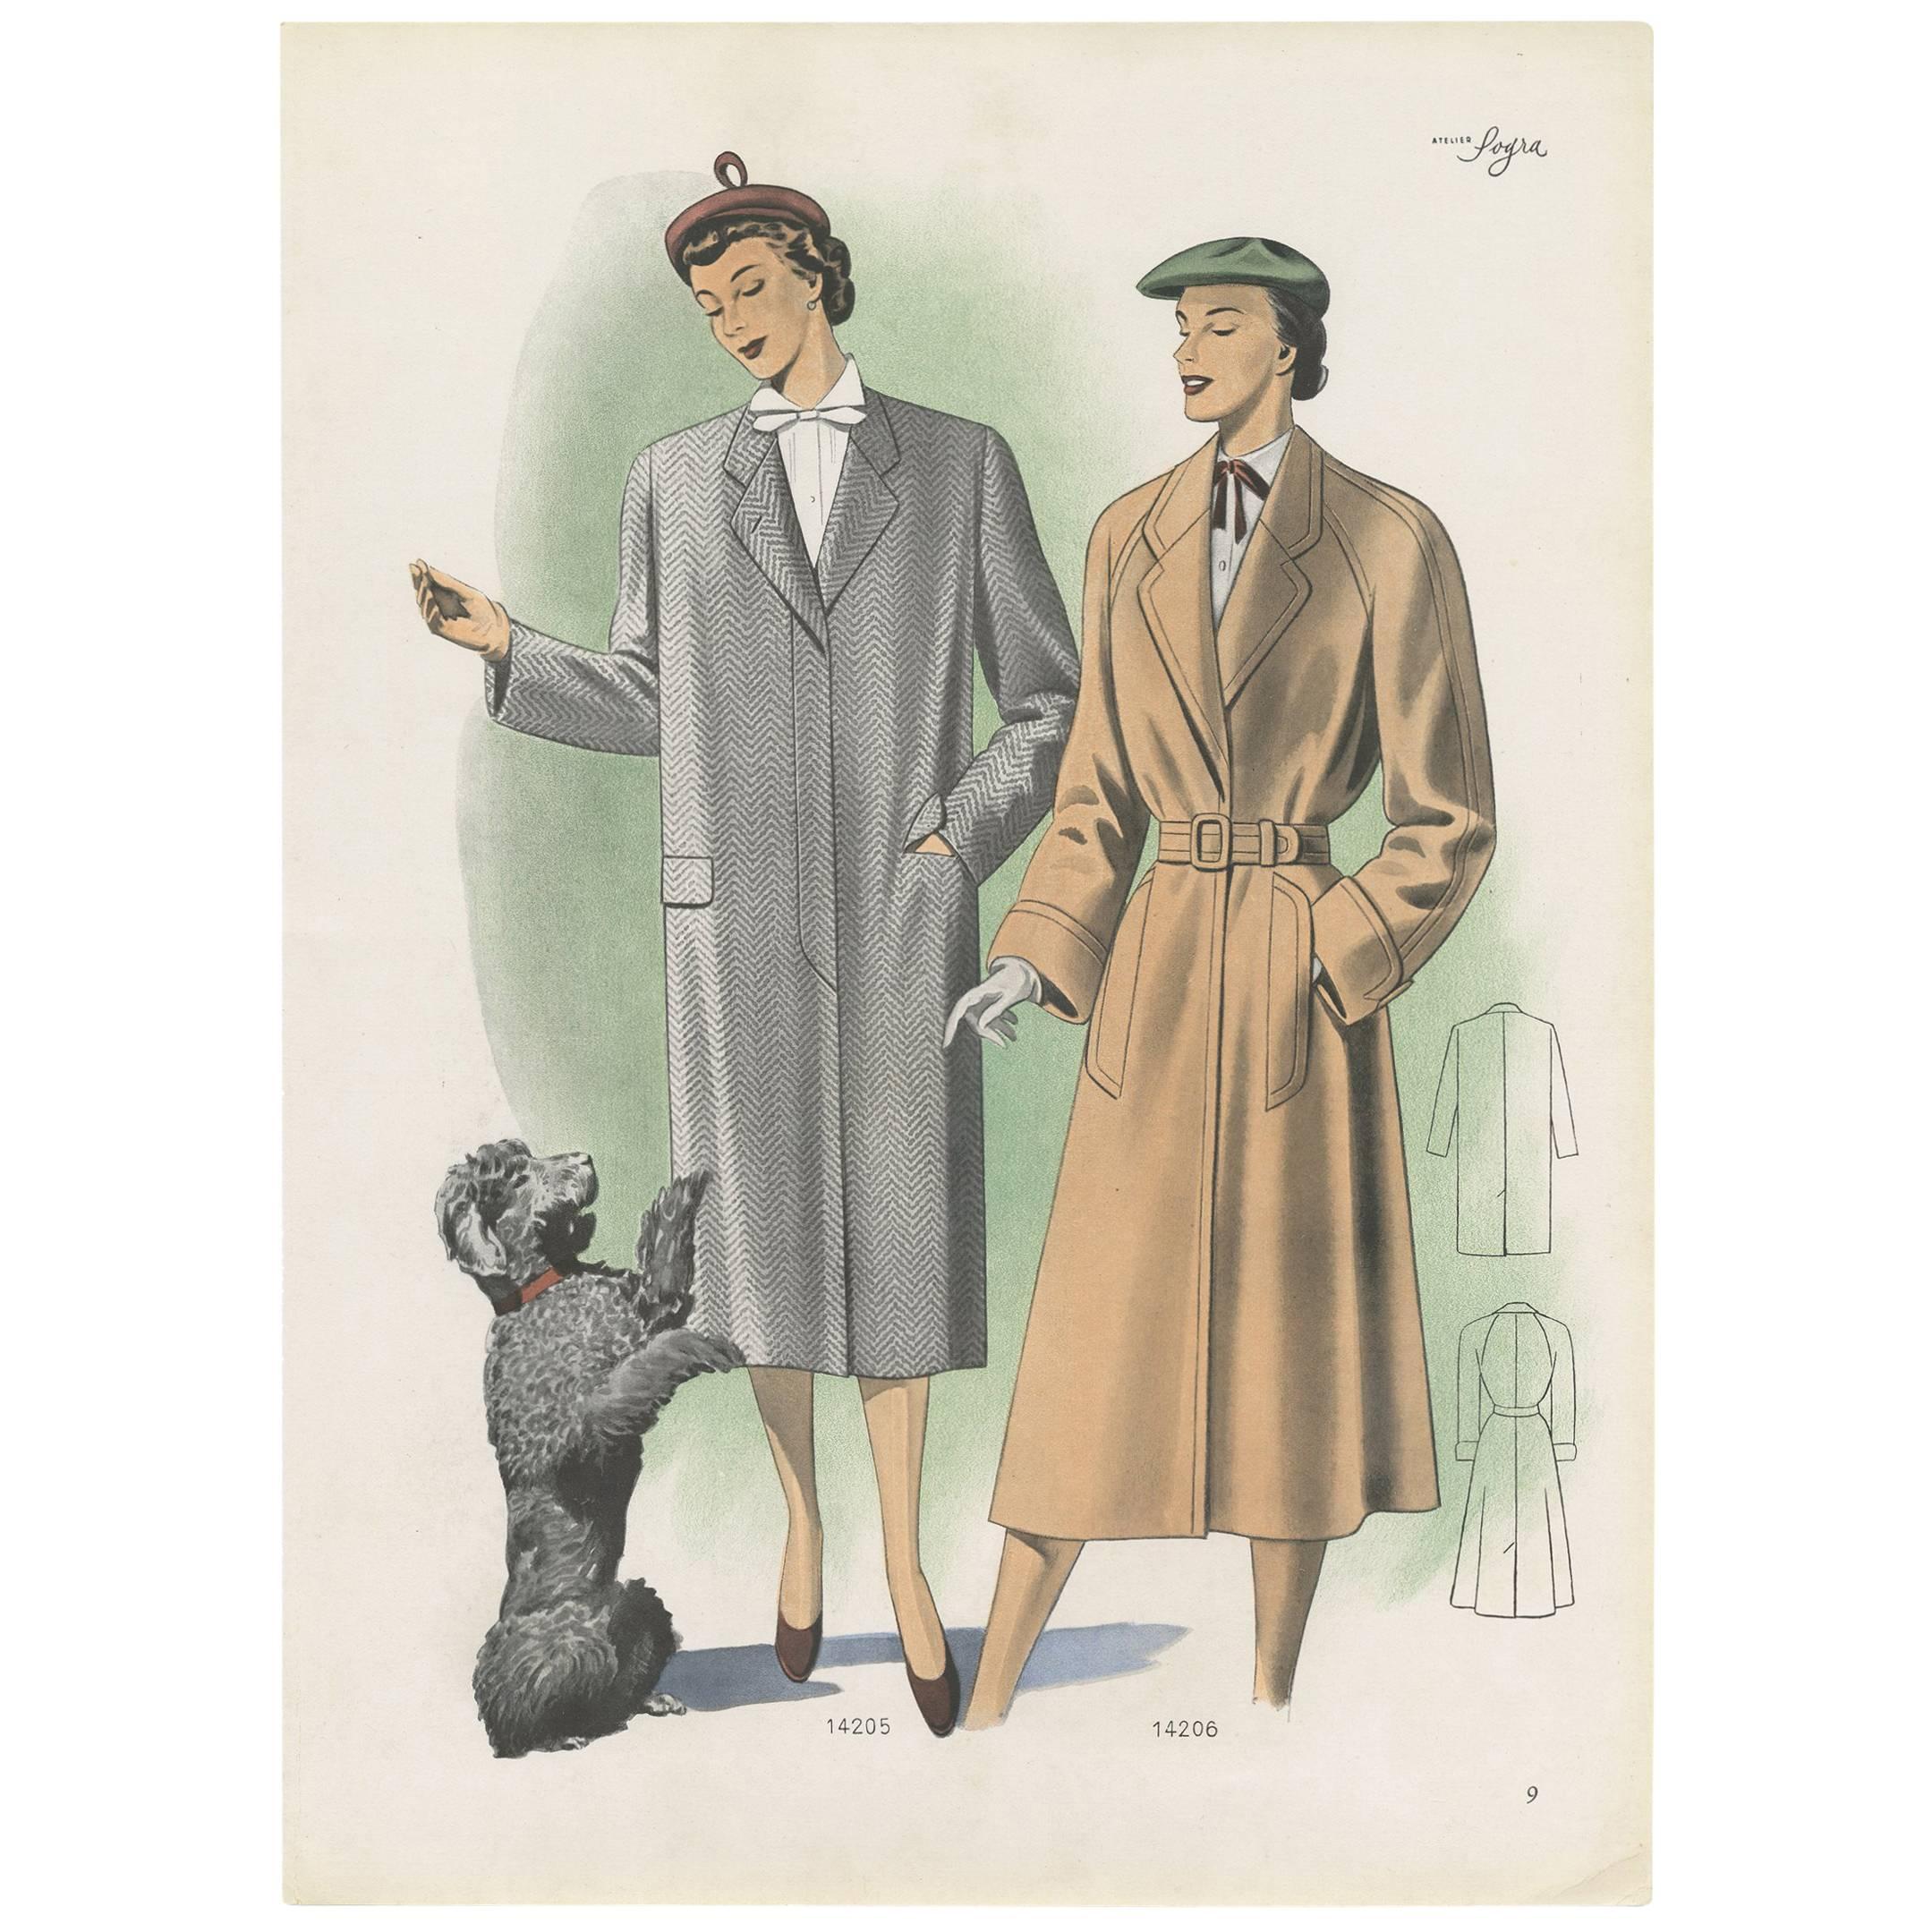 Vintage Fashion Print 'Pl.14205' Published in Ladies Styles, 1951